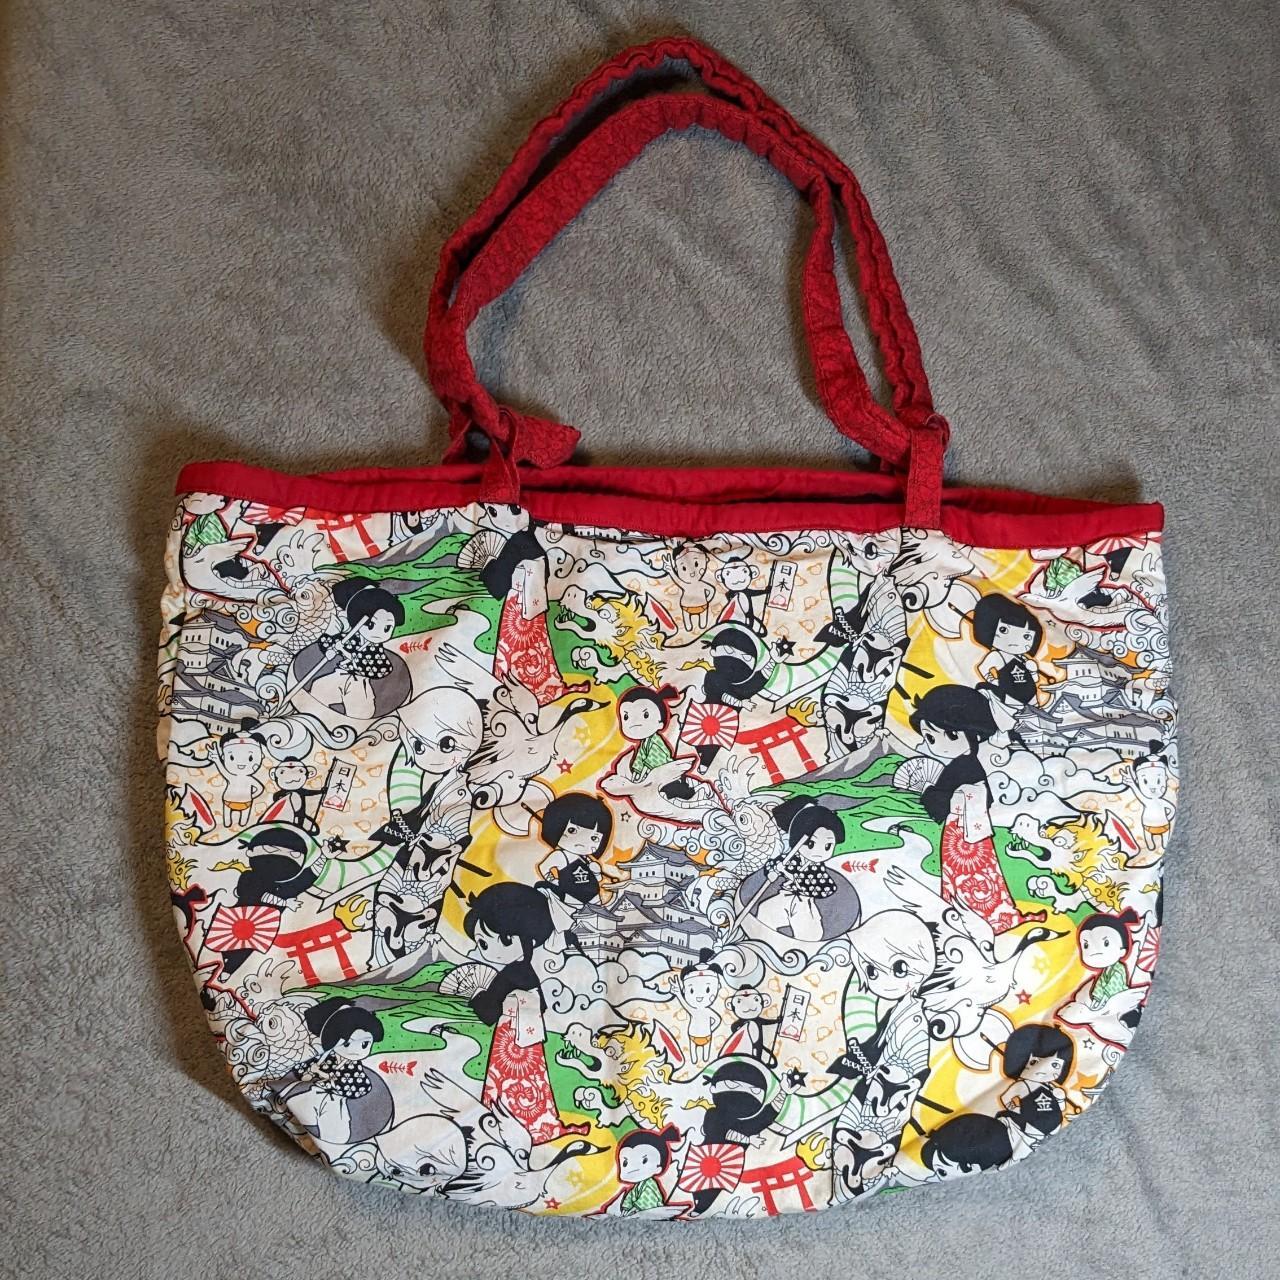 Women's White and Red Bag